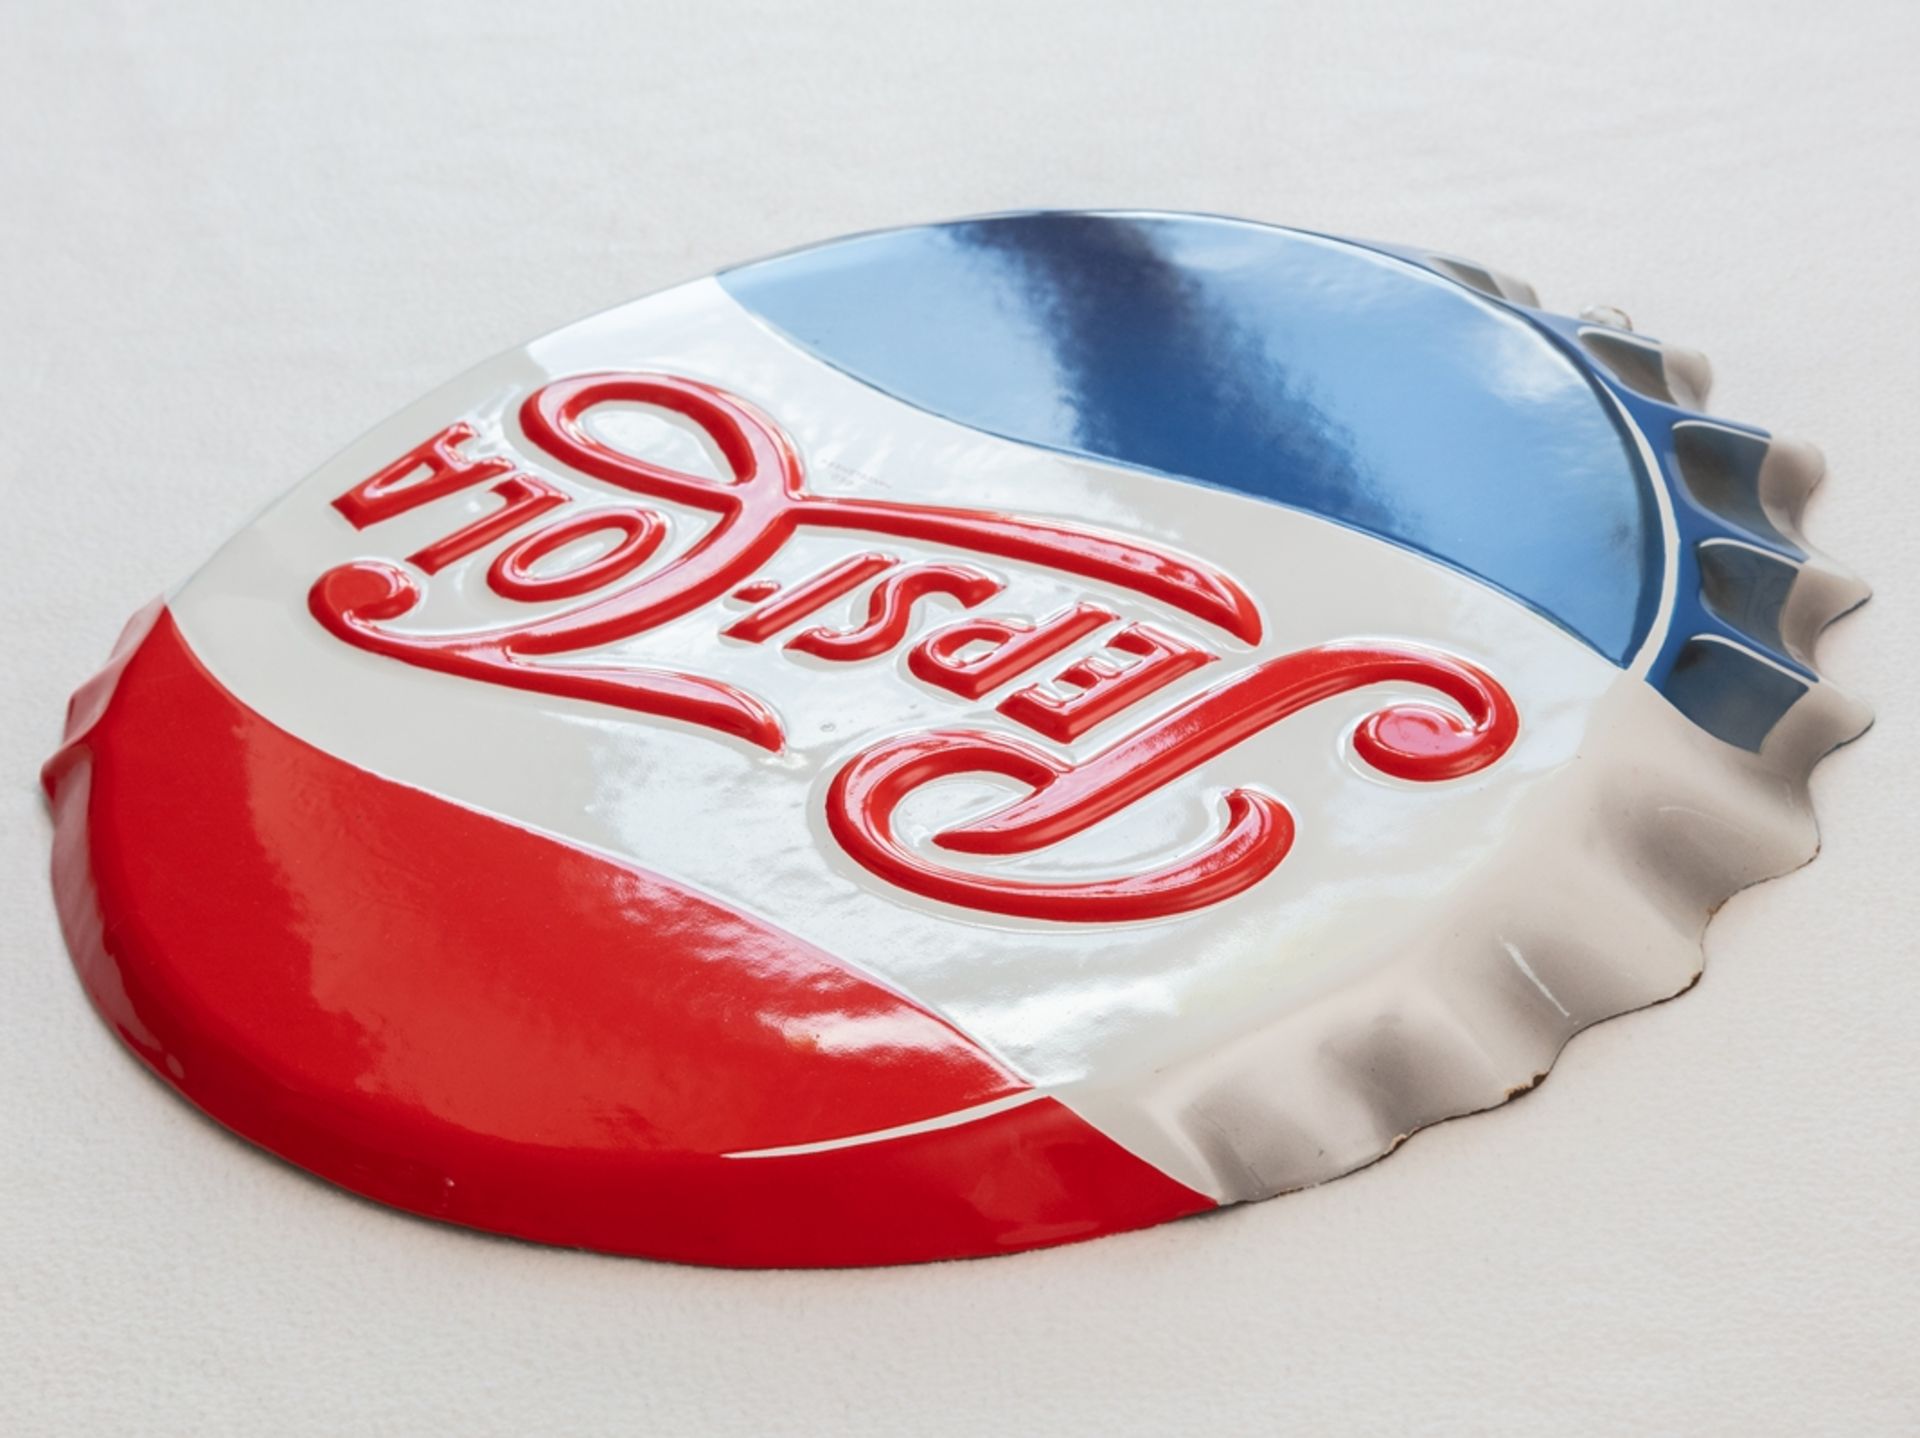 Enamel sign Pepsi Cola lid in dream condition! Netherlands around 1950 - Image 4 of 7